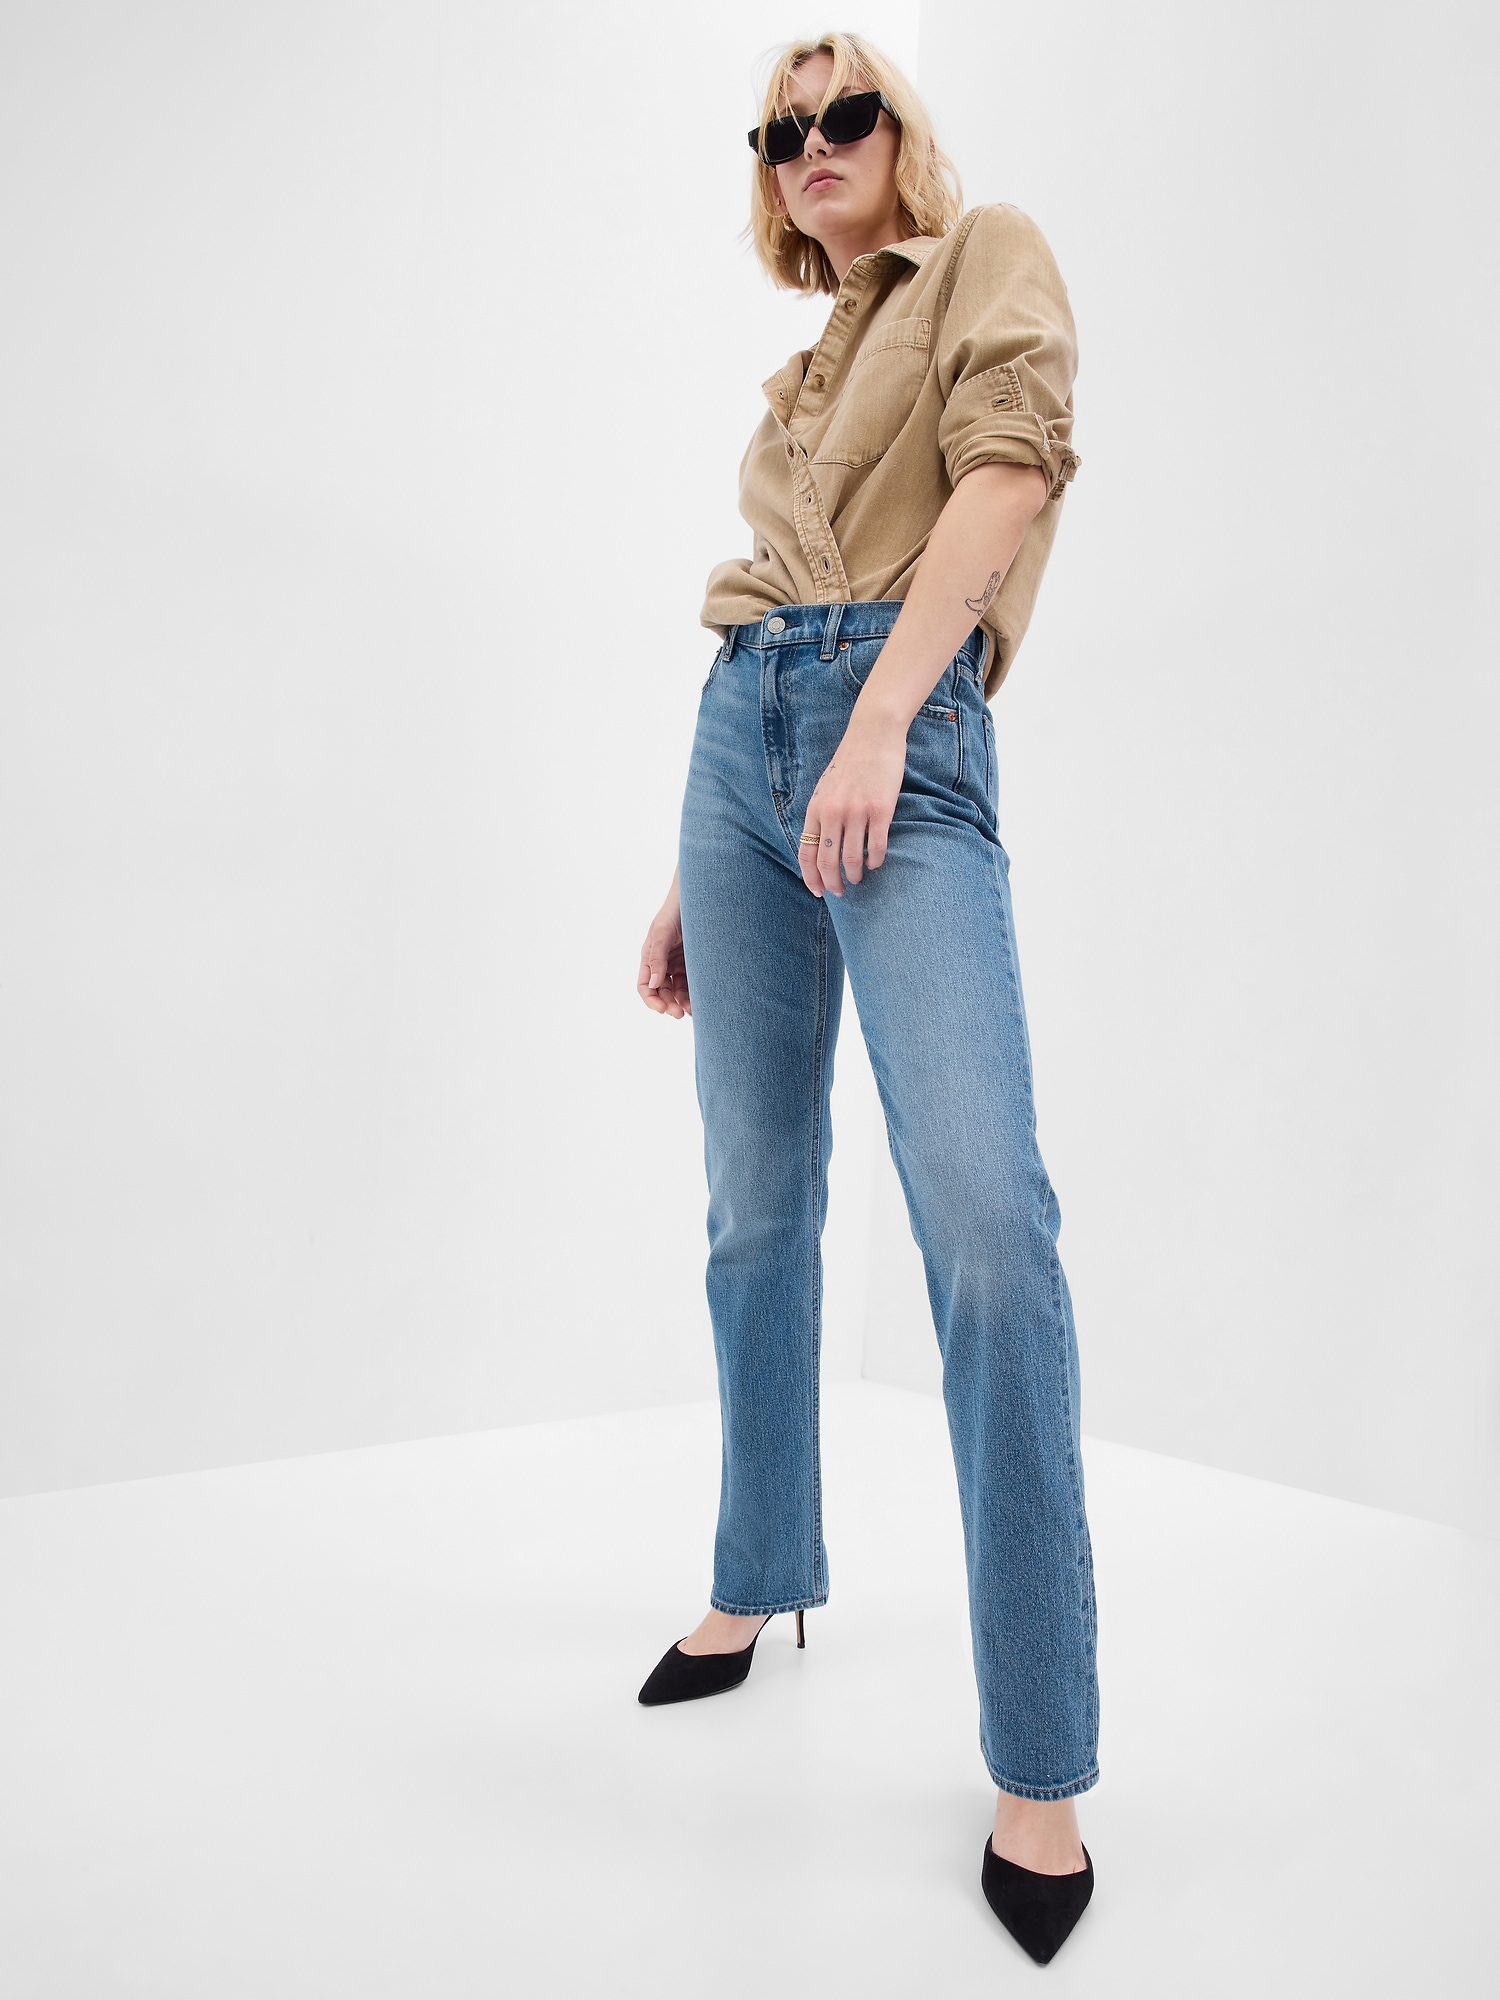 ’90s Straight Jeans with Washwell | Gap